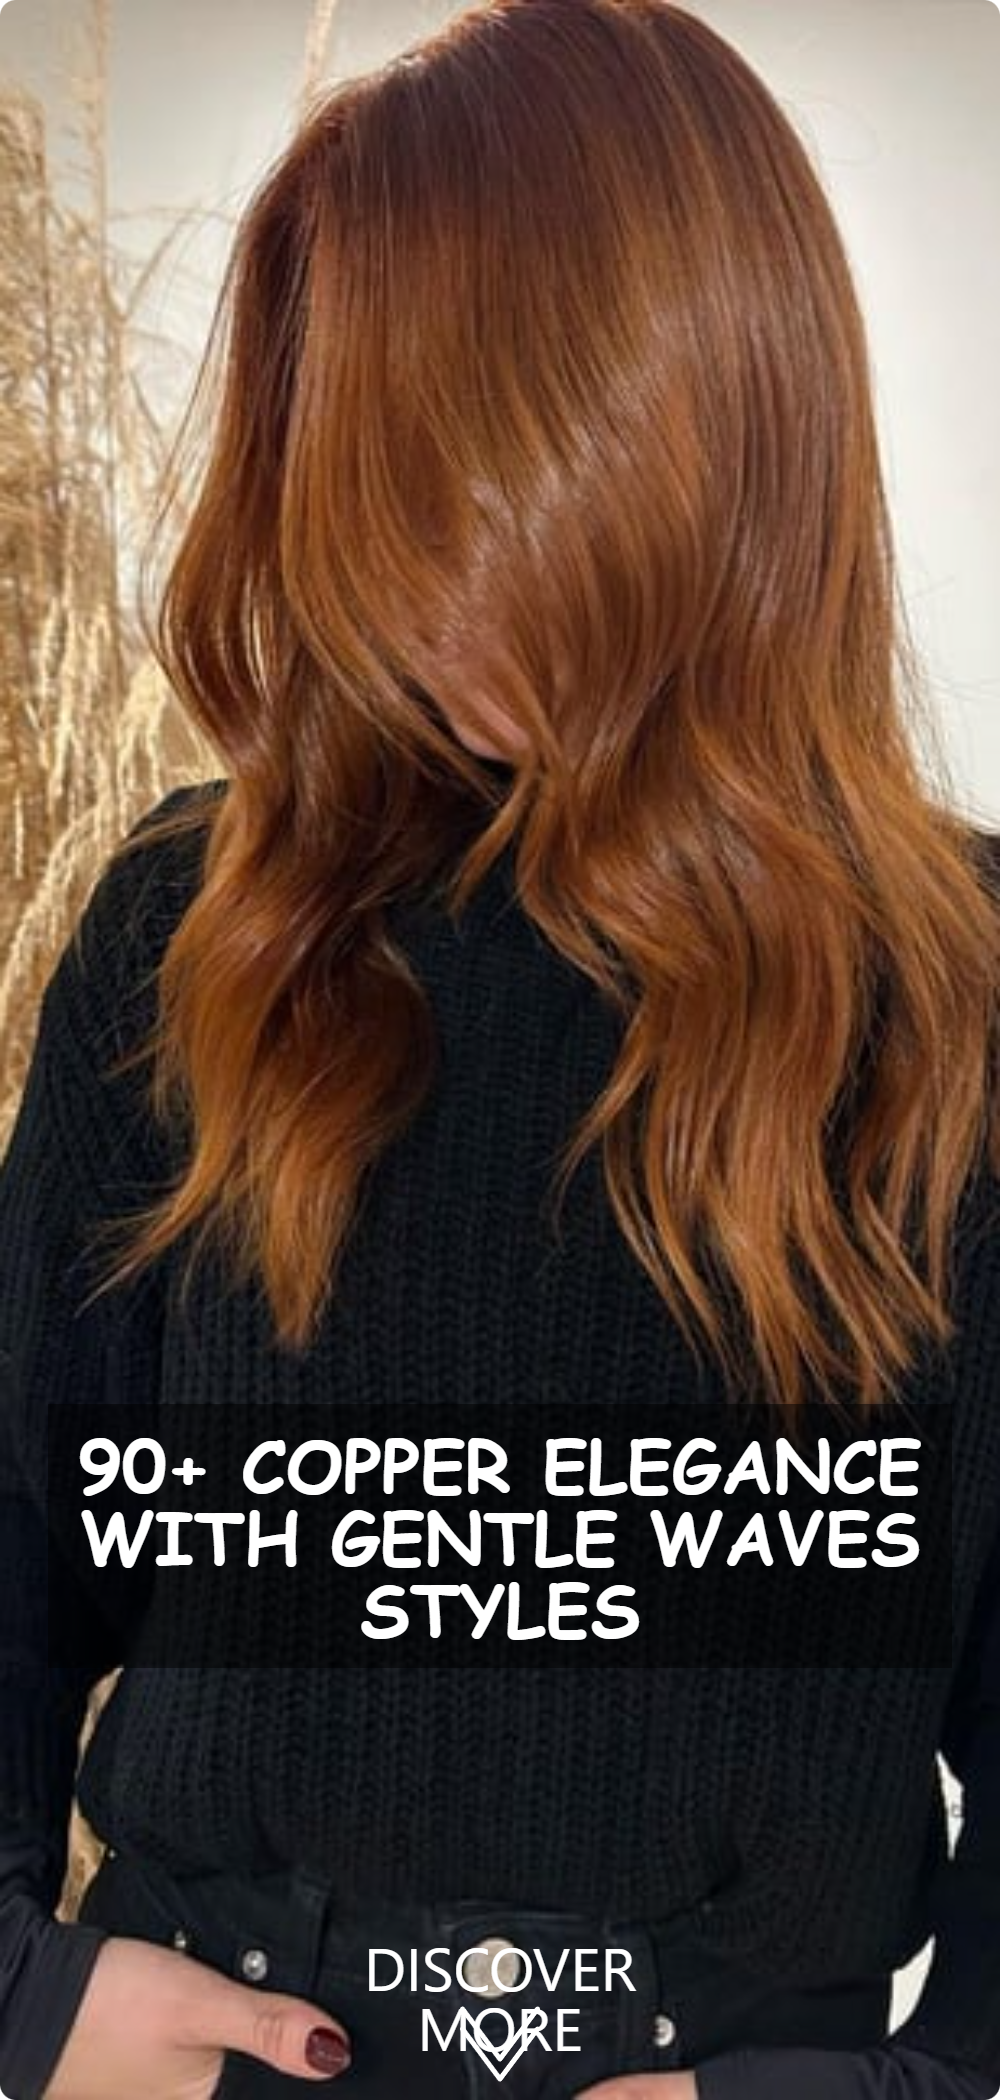 Copper Elegance with Gentle Waves